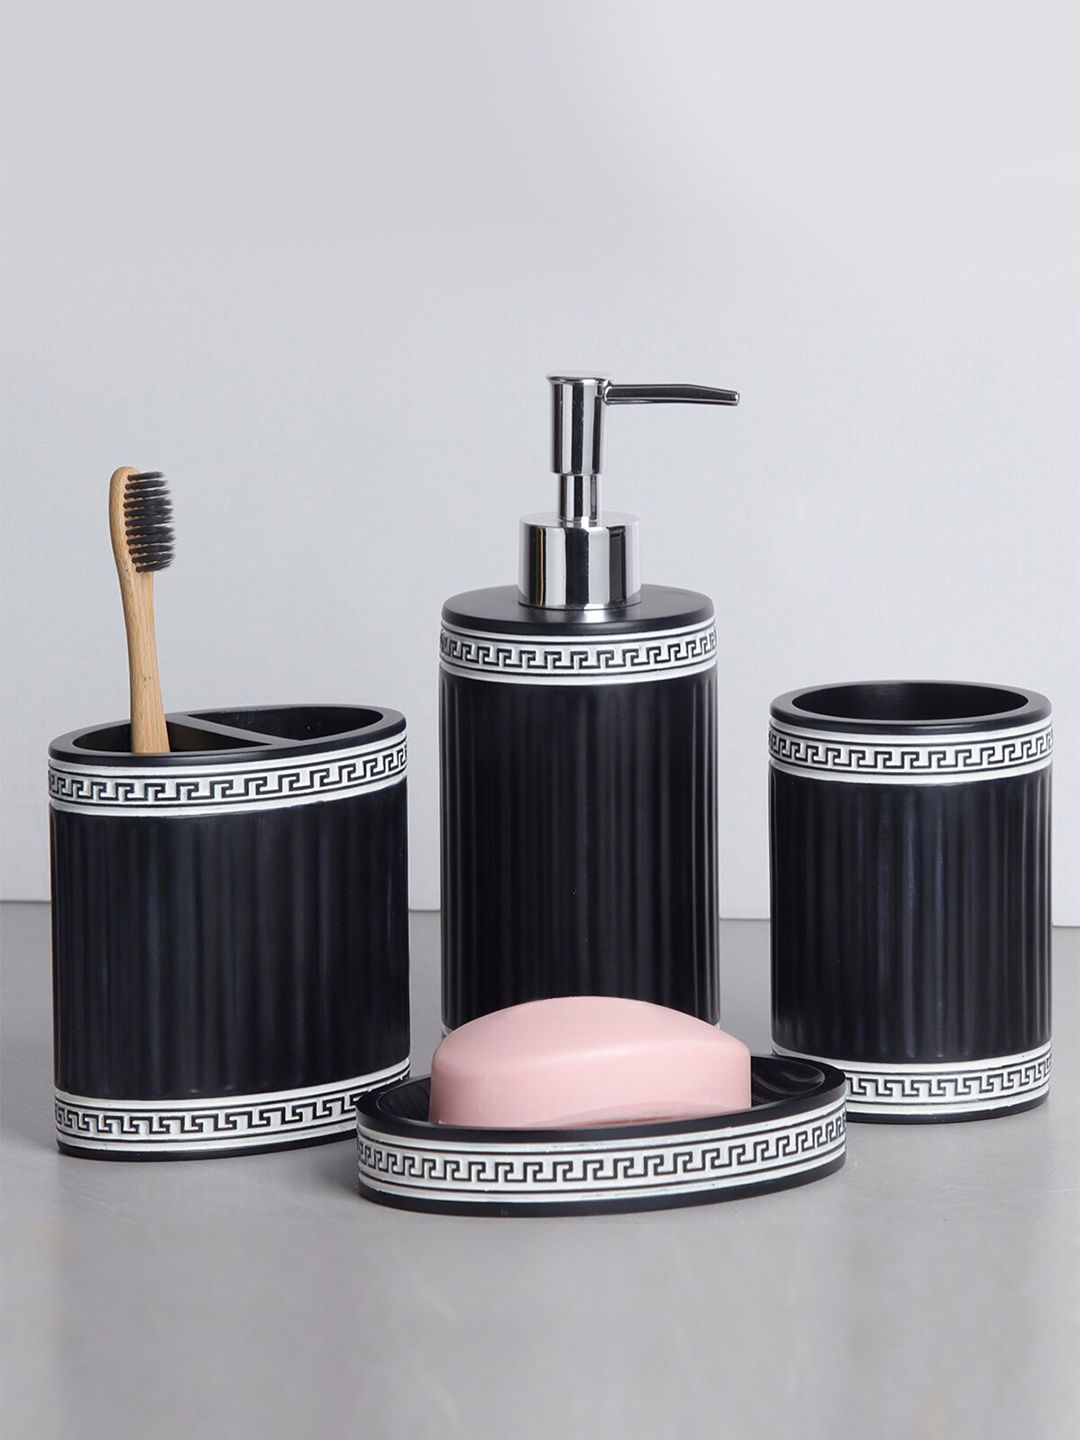 OBSESSIONS Black & White Polyresin Bathroom Set- 4 Pieces Price in India